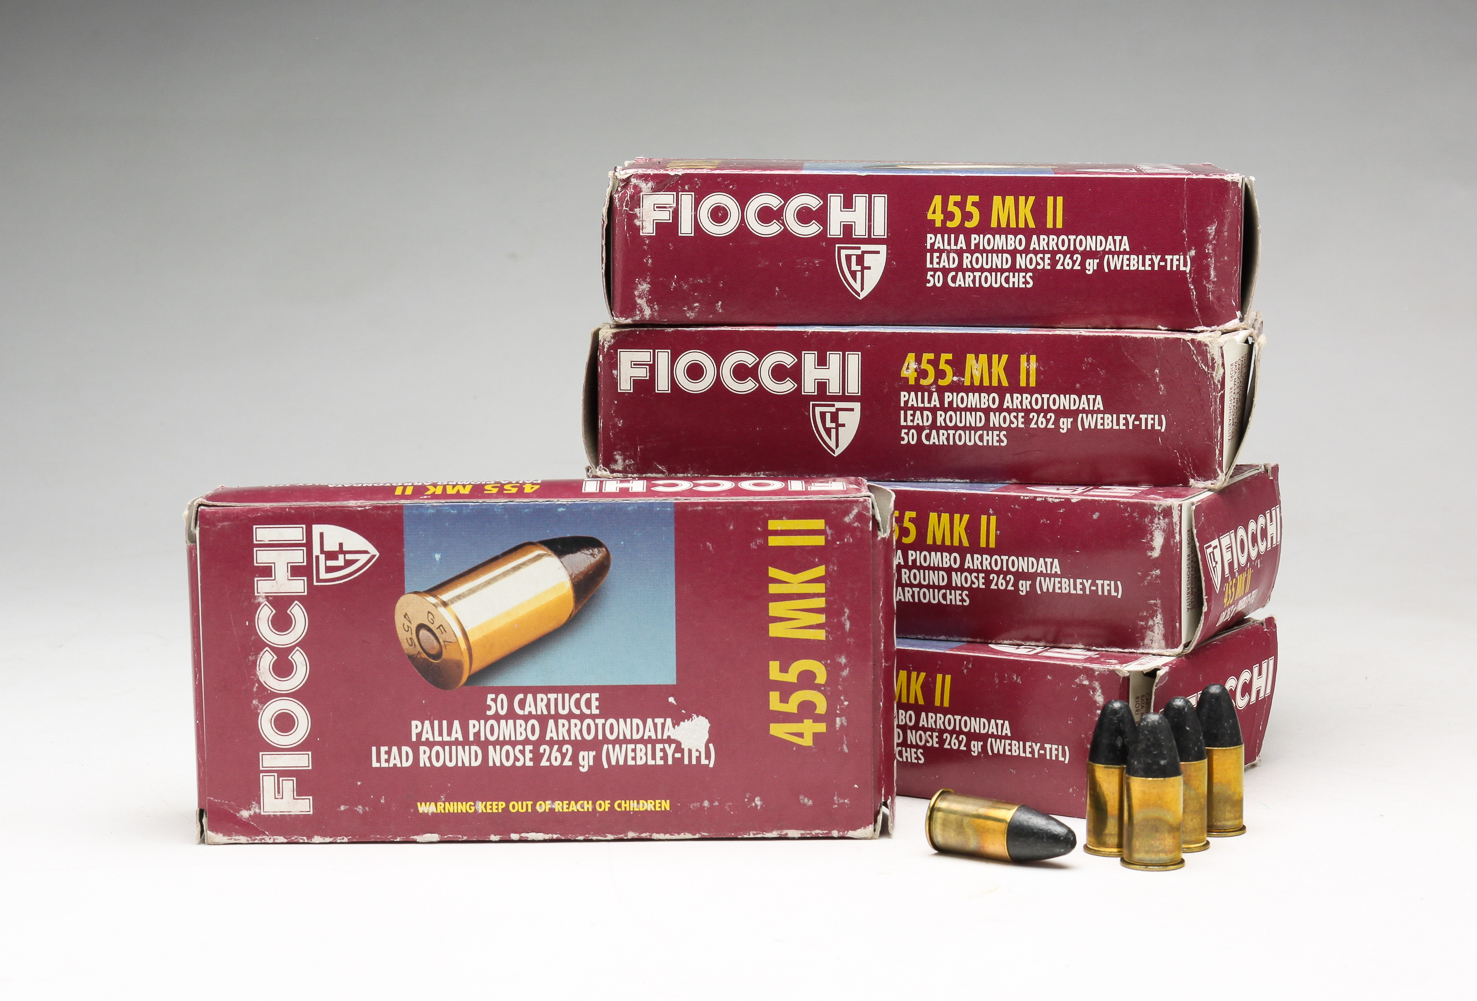 250 ROUNDS OF FIOCCHI 455 MK II 31a765